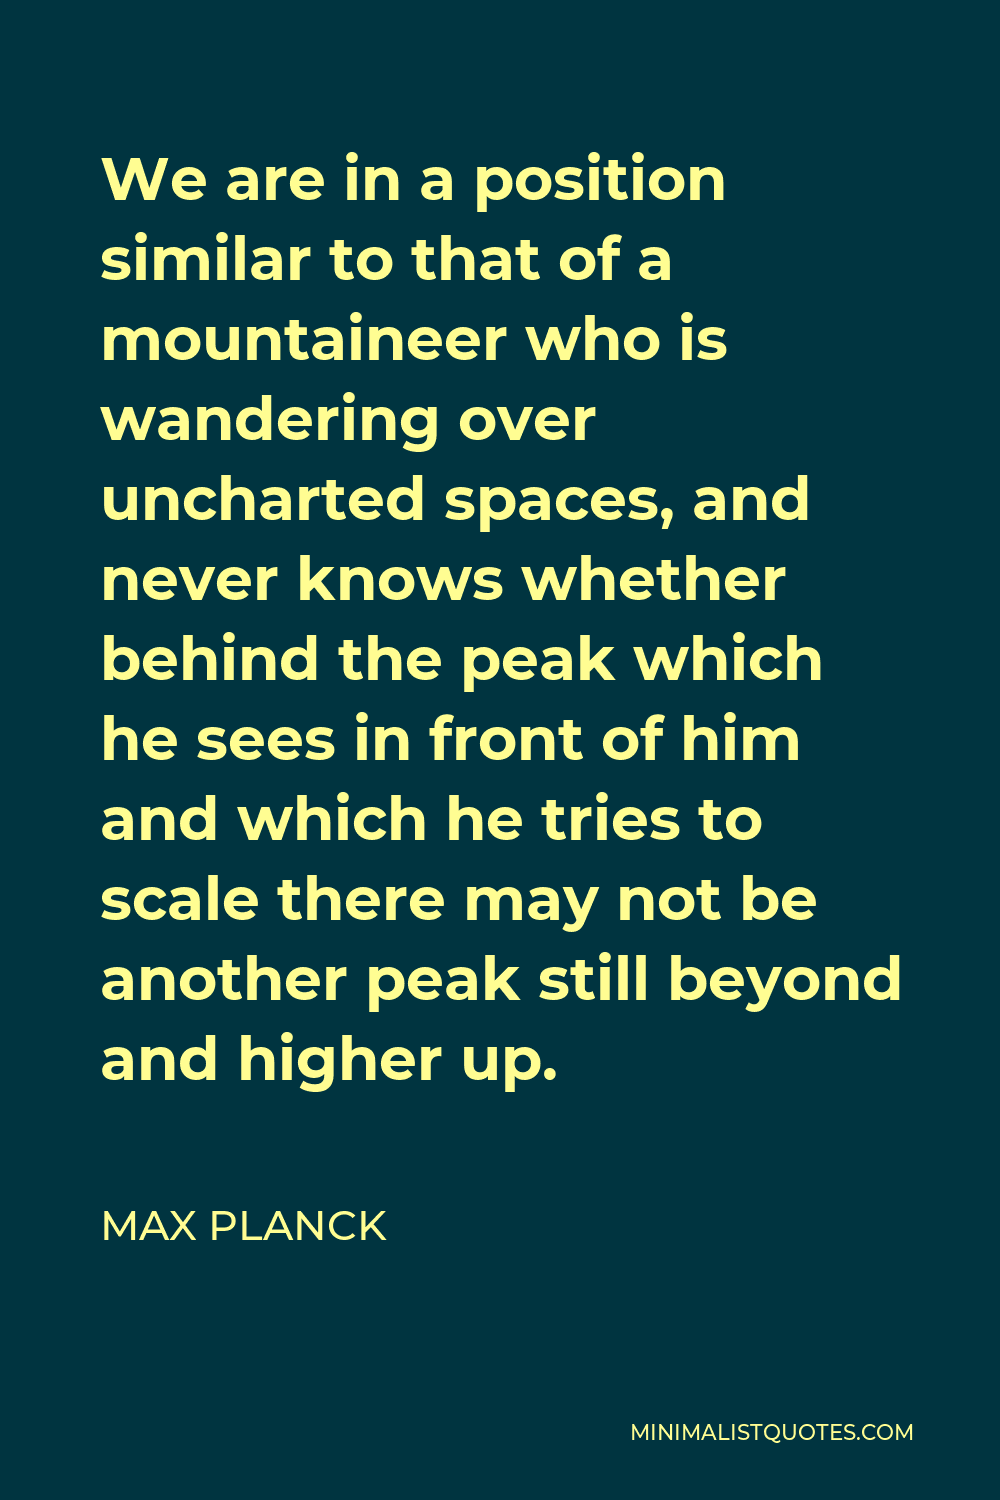 Max Planck Quote - We are in a position similar to that of a mountaineer who is wandering over uncharted spaces, and never knows whether behind the peak which he sees in front of him and which he tries to scale there may not be another peak still beyond and higher up.